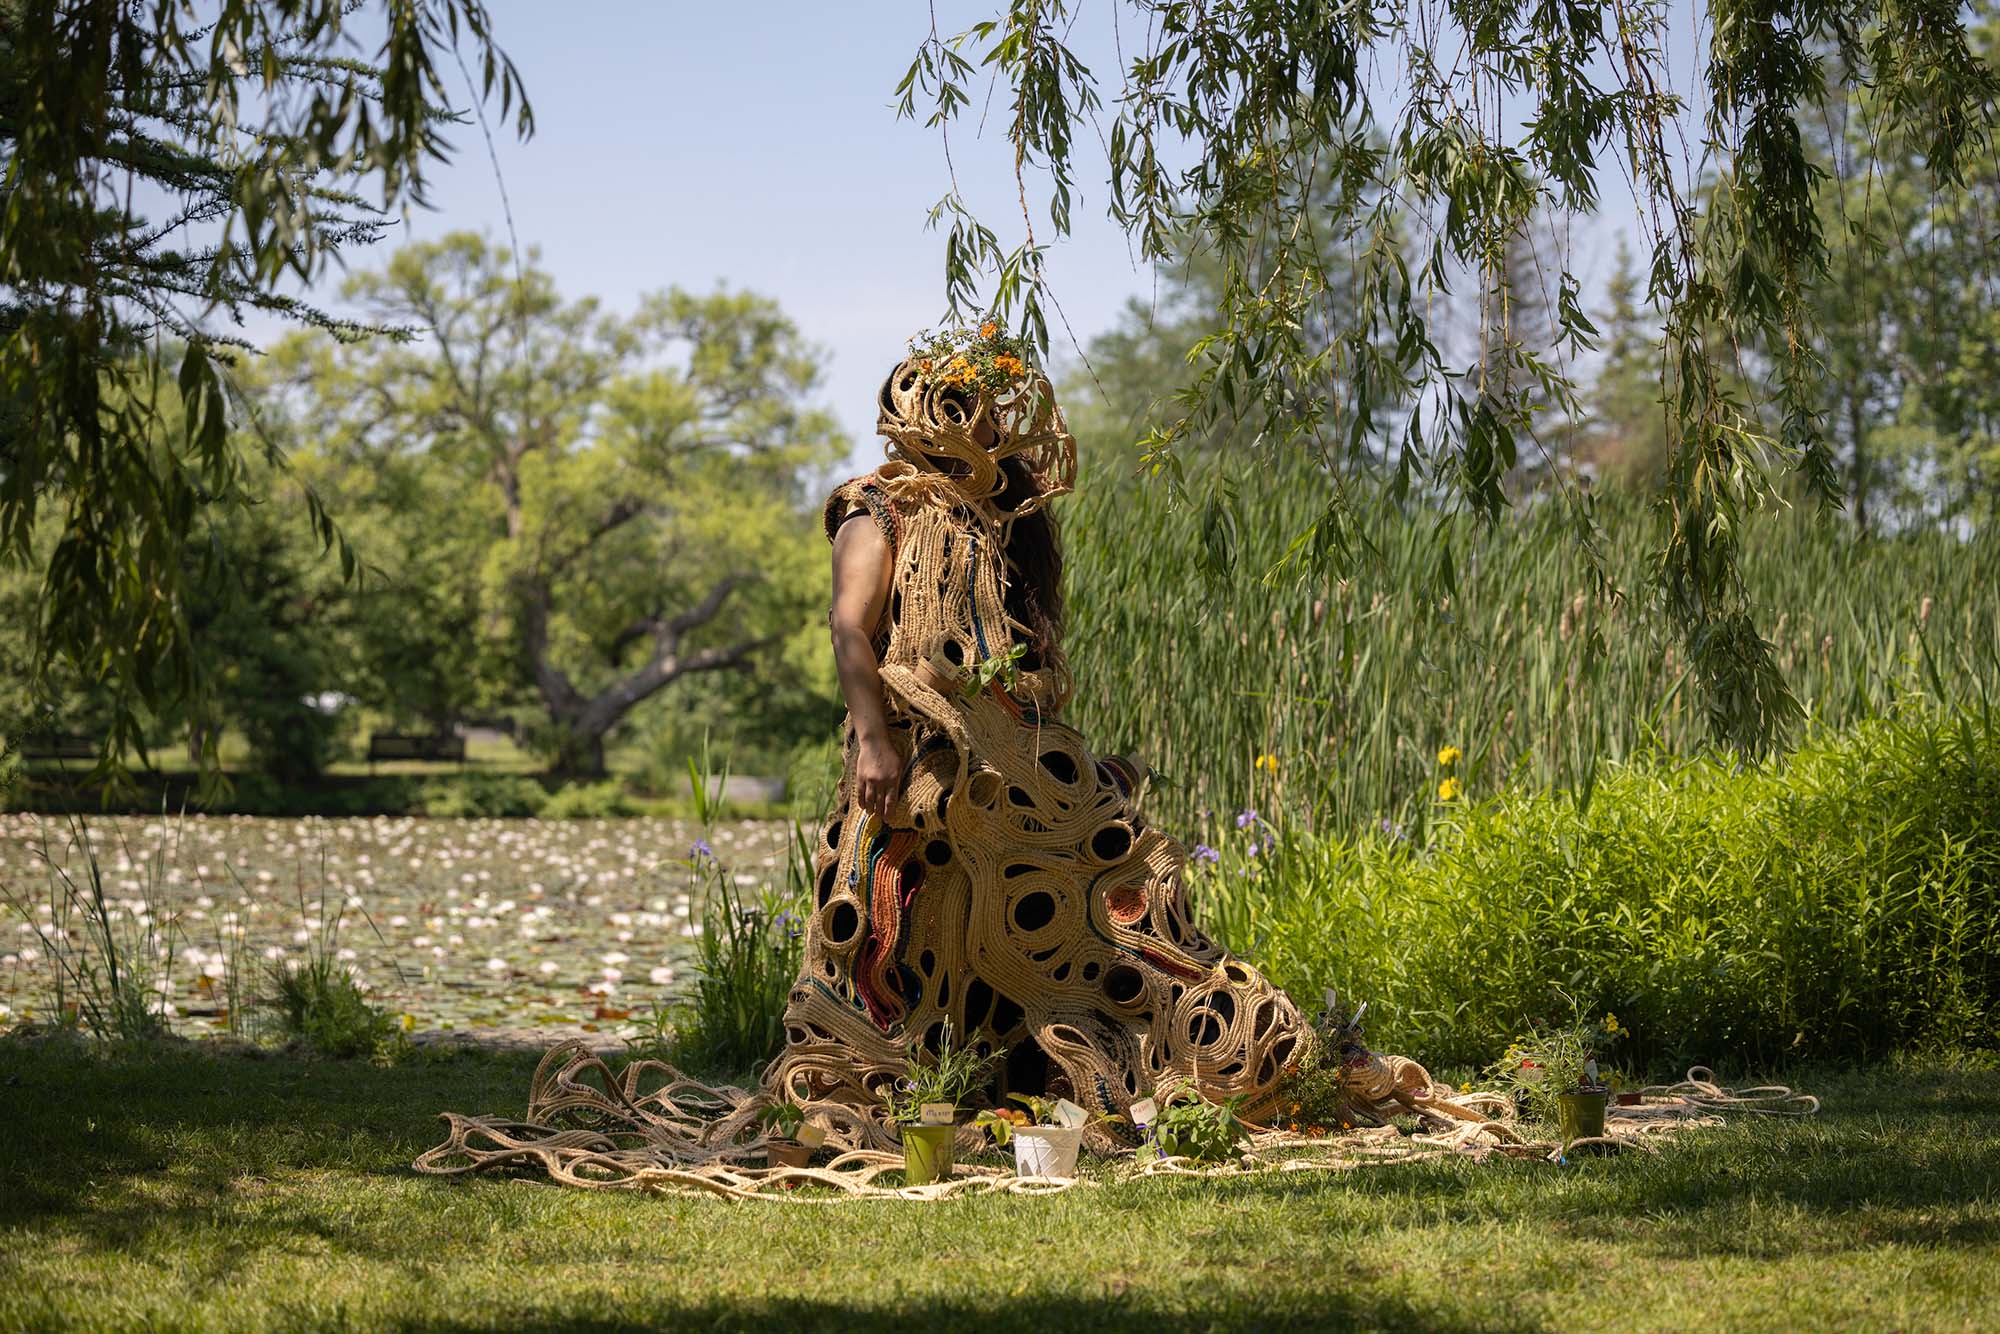 a performer draped in a sculpture of rope in the middle of a garden, surrounded by trees and plants